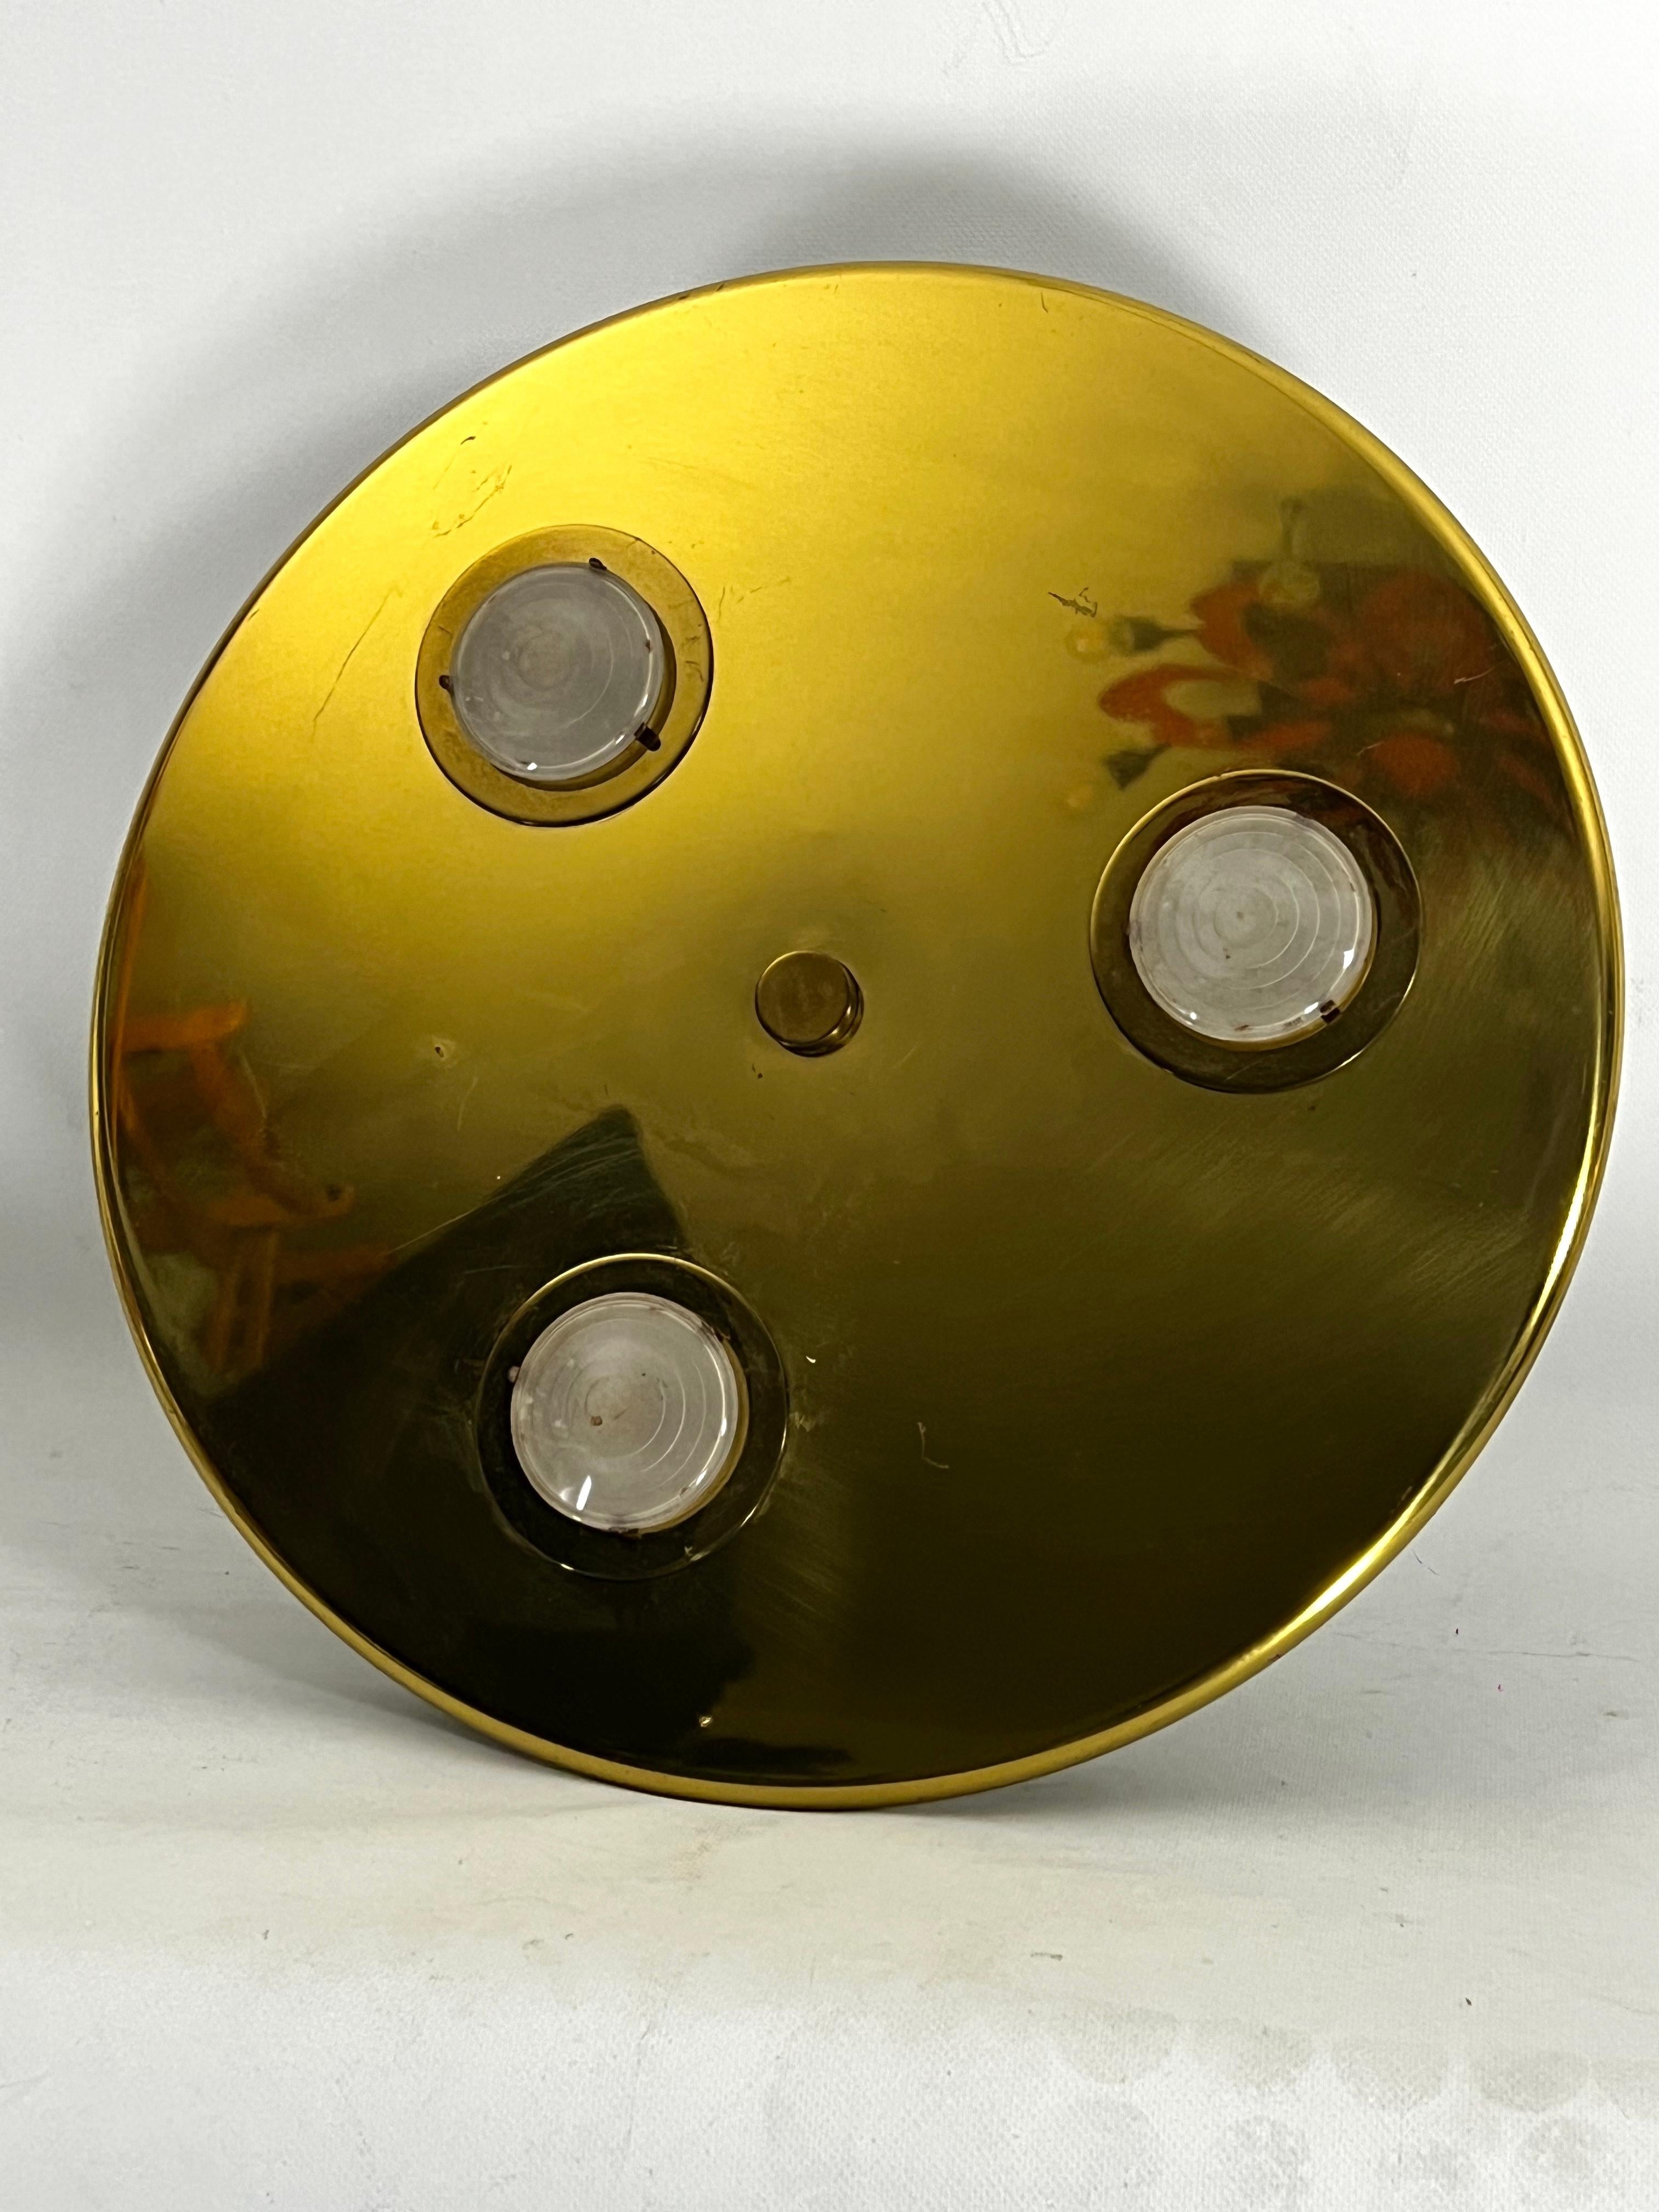 This Gilded brass round ceiling or wall lamp with three glasses has been produced in Italy during the 70s.
Good vintage condition with normal trace of age and use. No cracks or chips. Slight scratches and some dots on the brass. Full working with EU